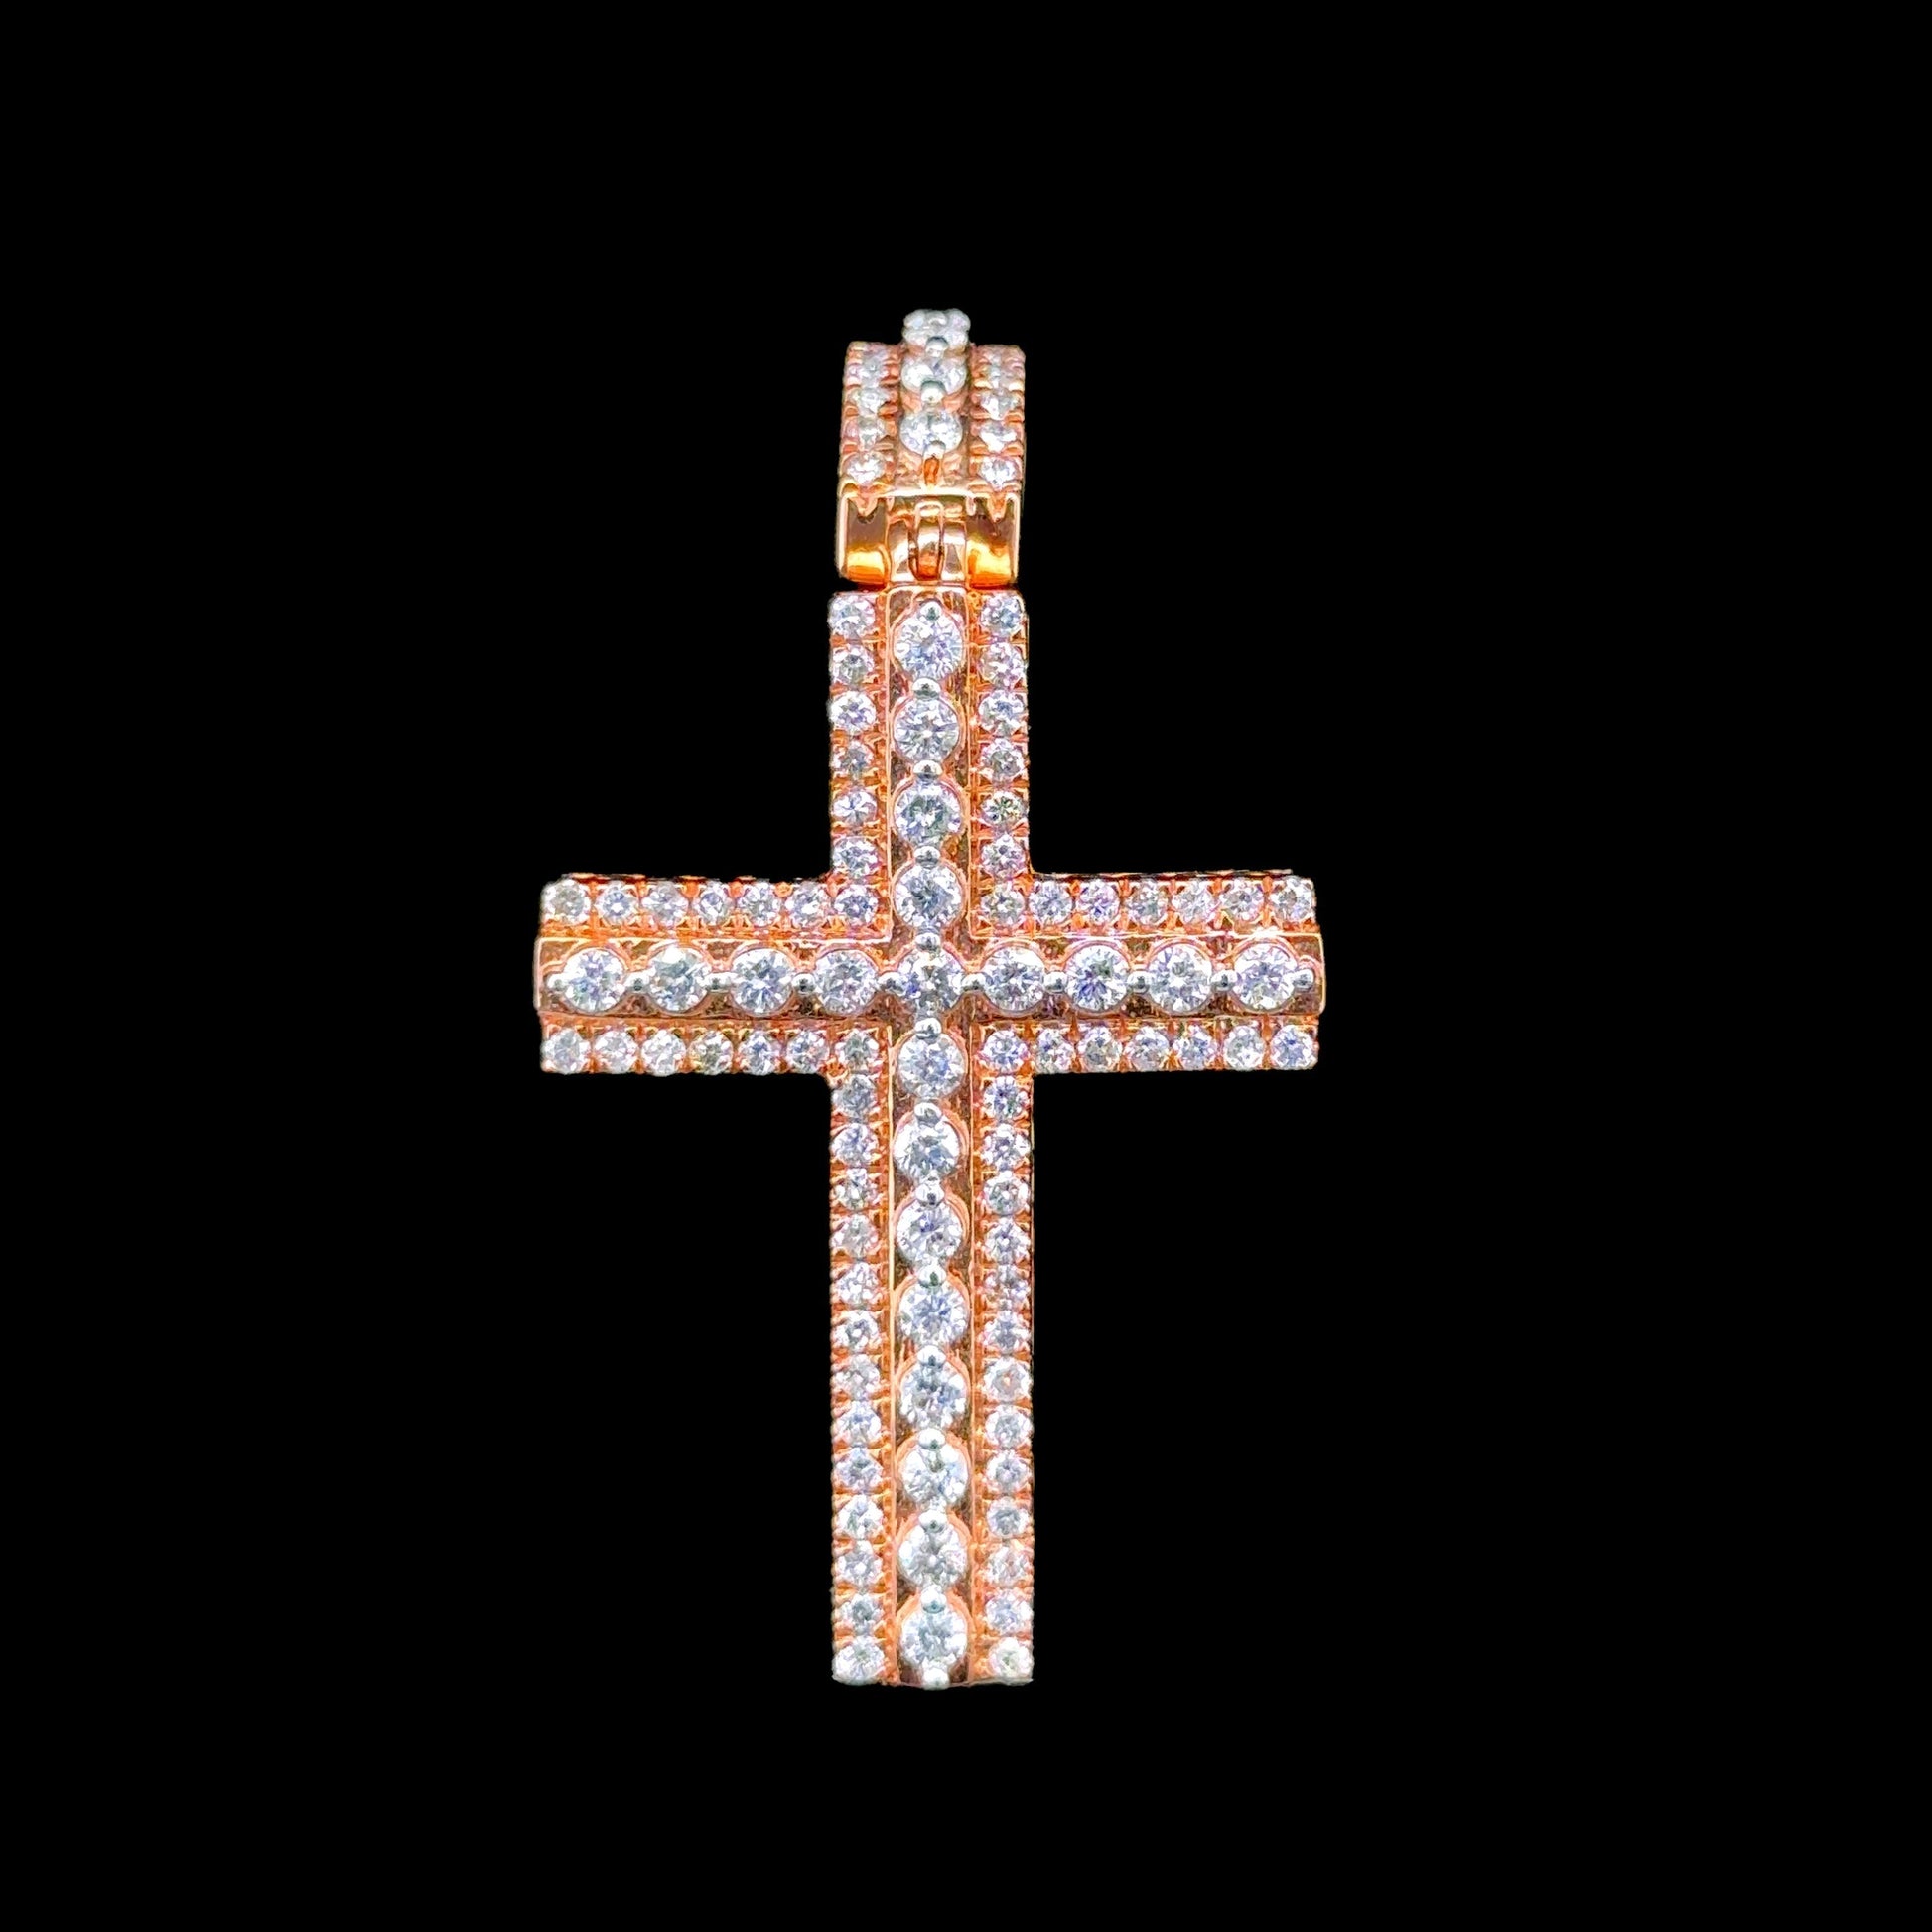 Rose gold cross pendant adorned with 1.75 carats of sparkling diamonds.